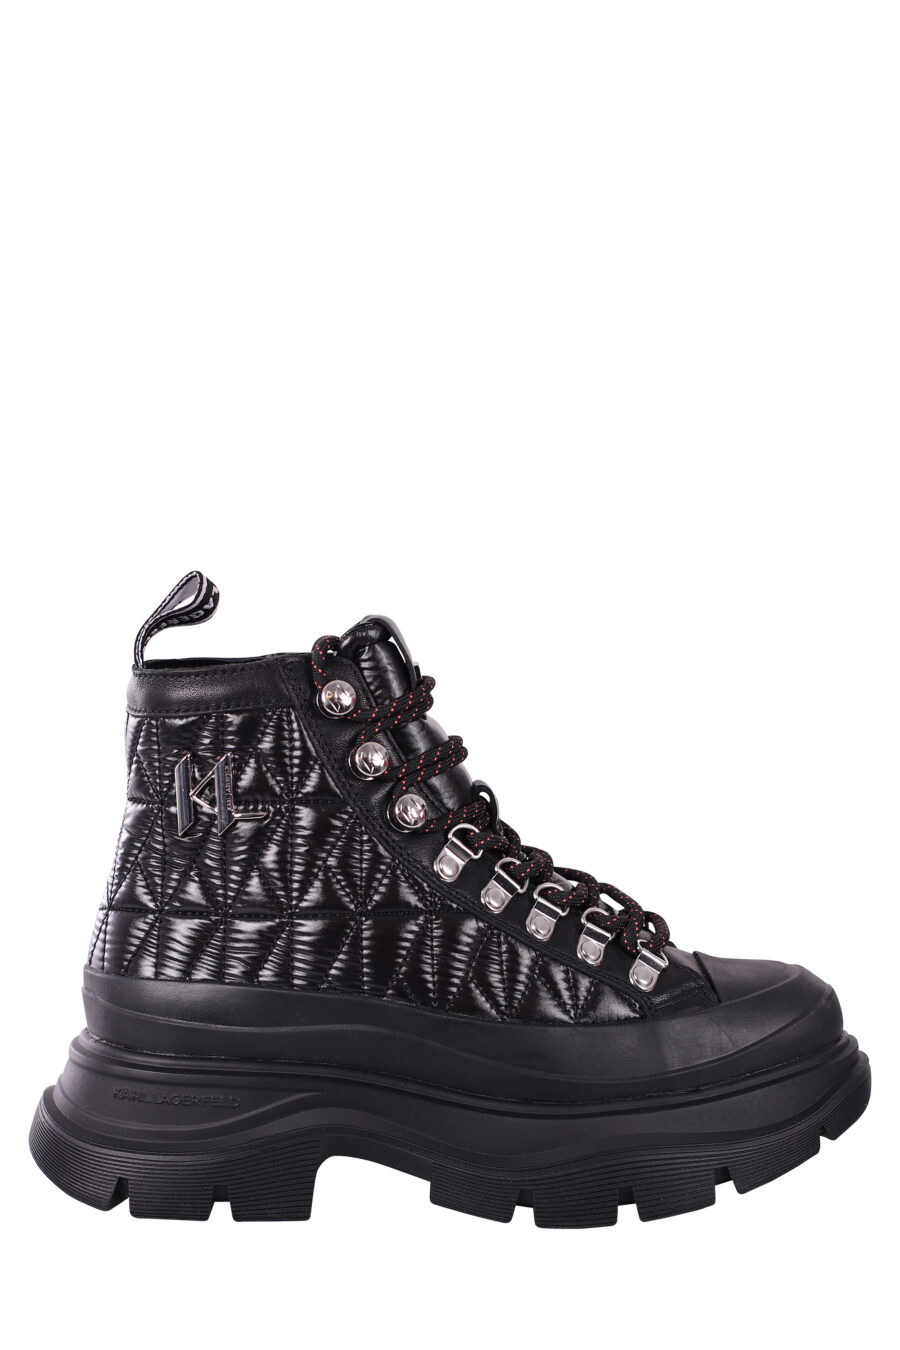 Black ankle boots with silver monogram logo and laces - IMG 5803